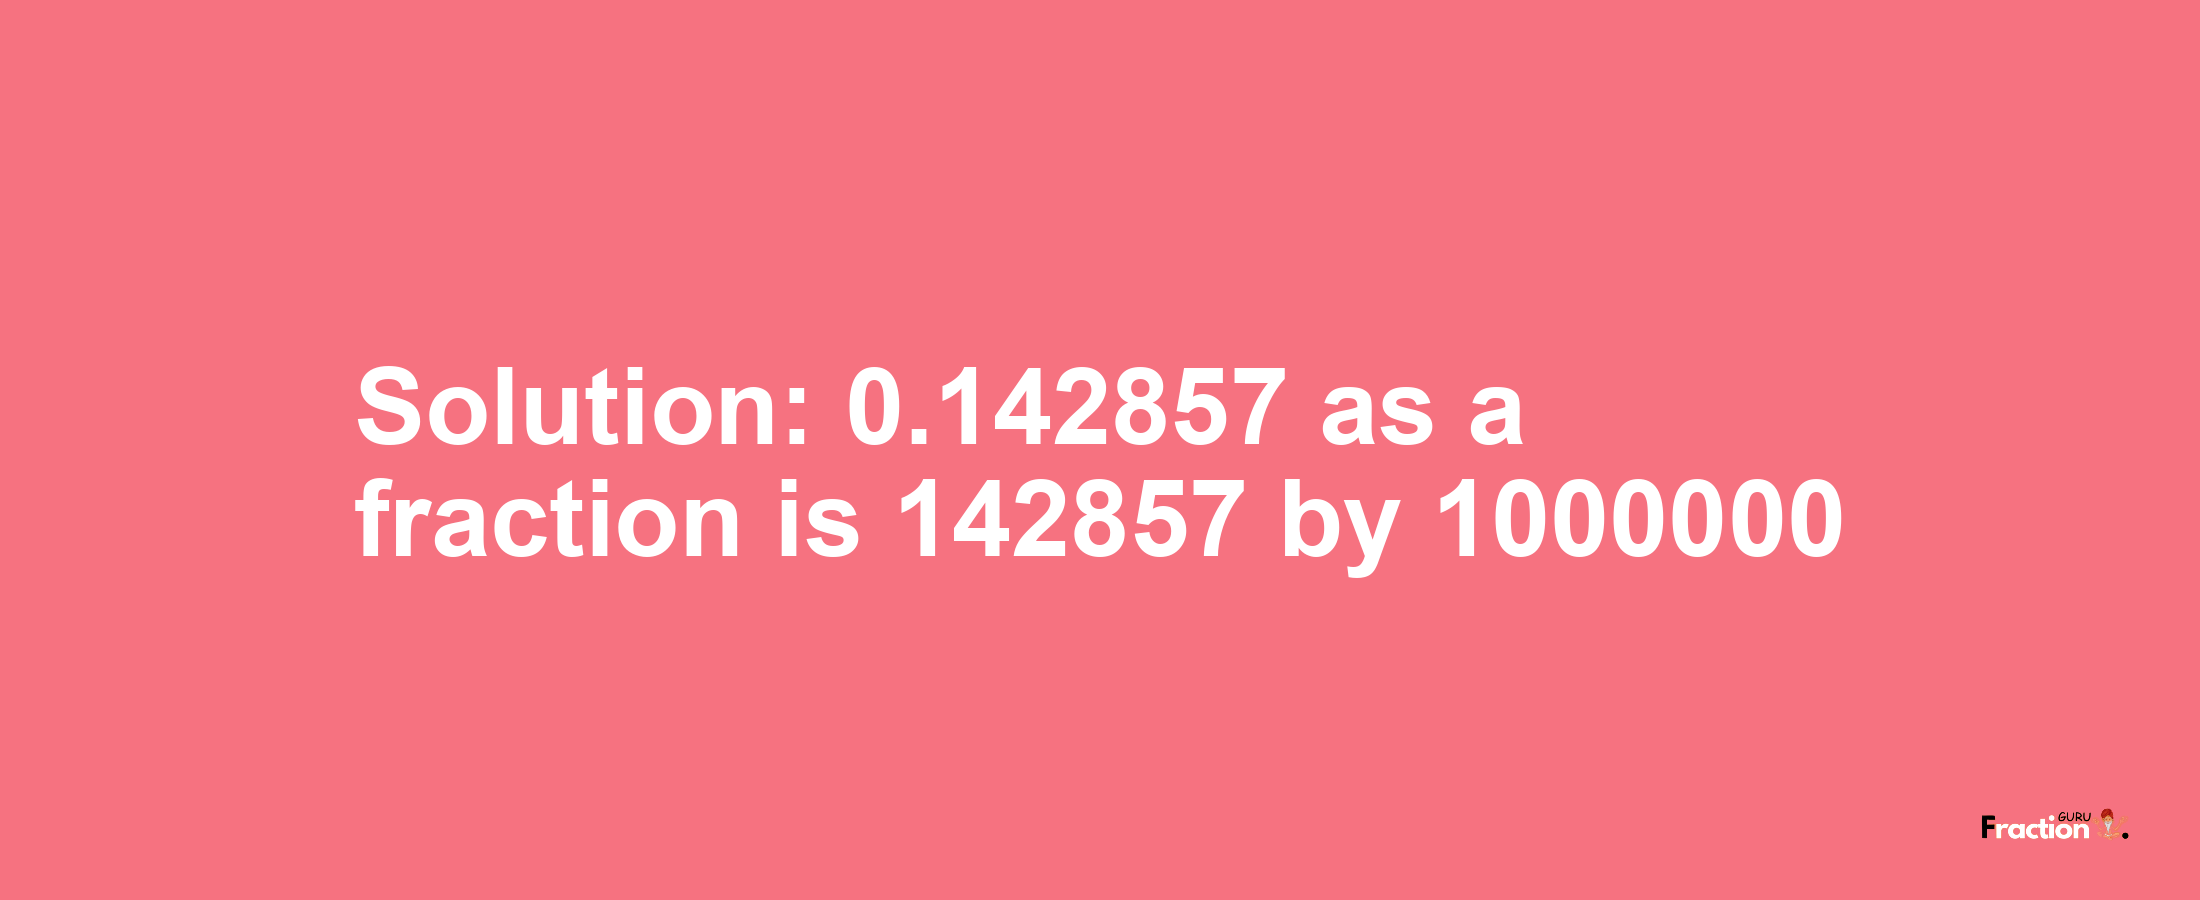 Solution:0.142857 as a fraction is 142857/1000000